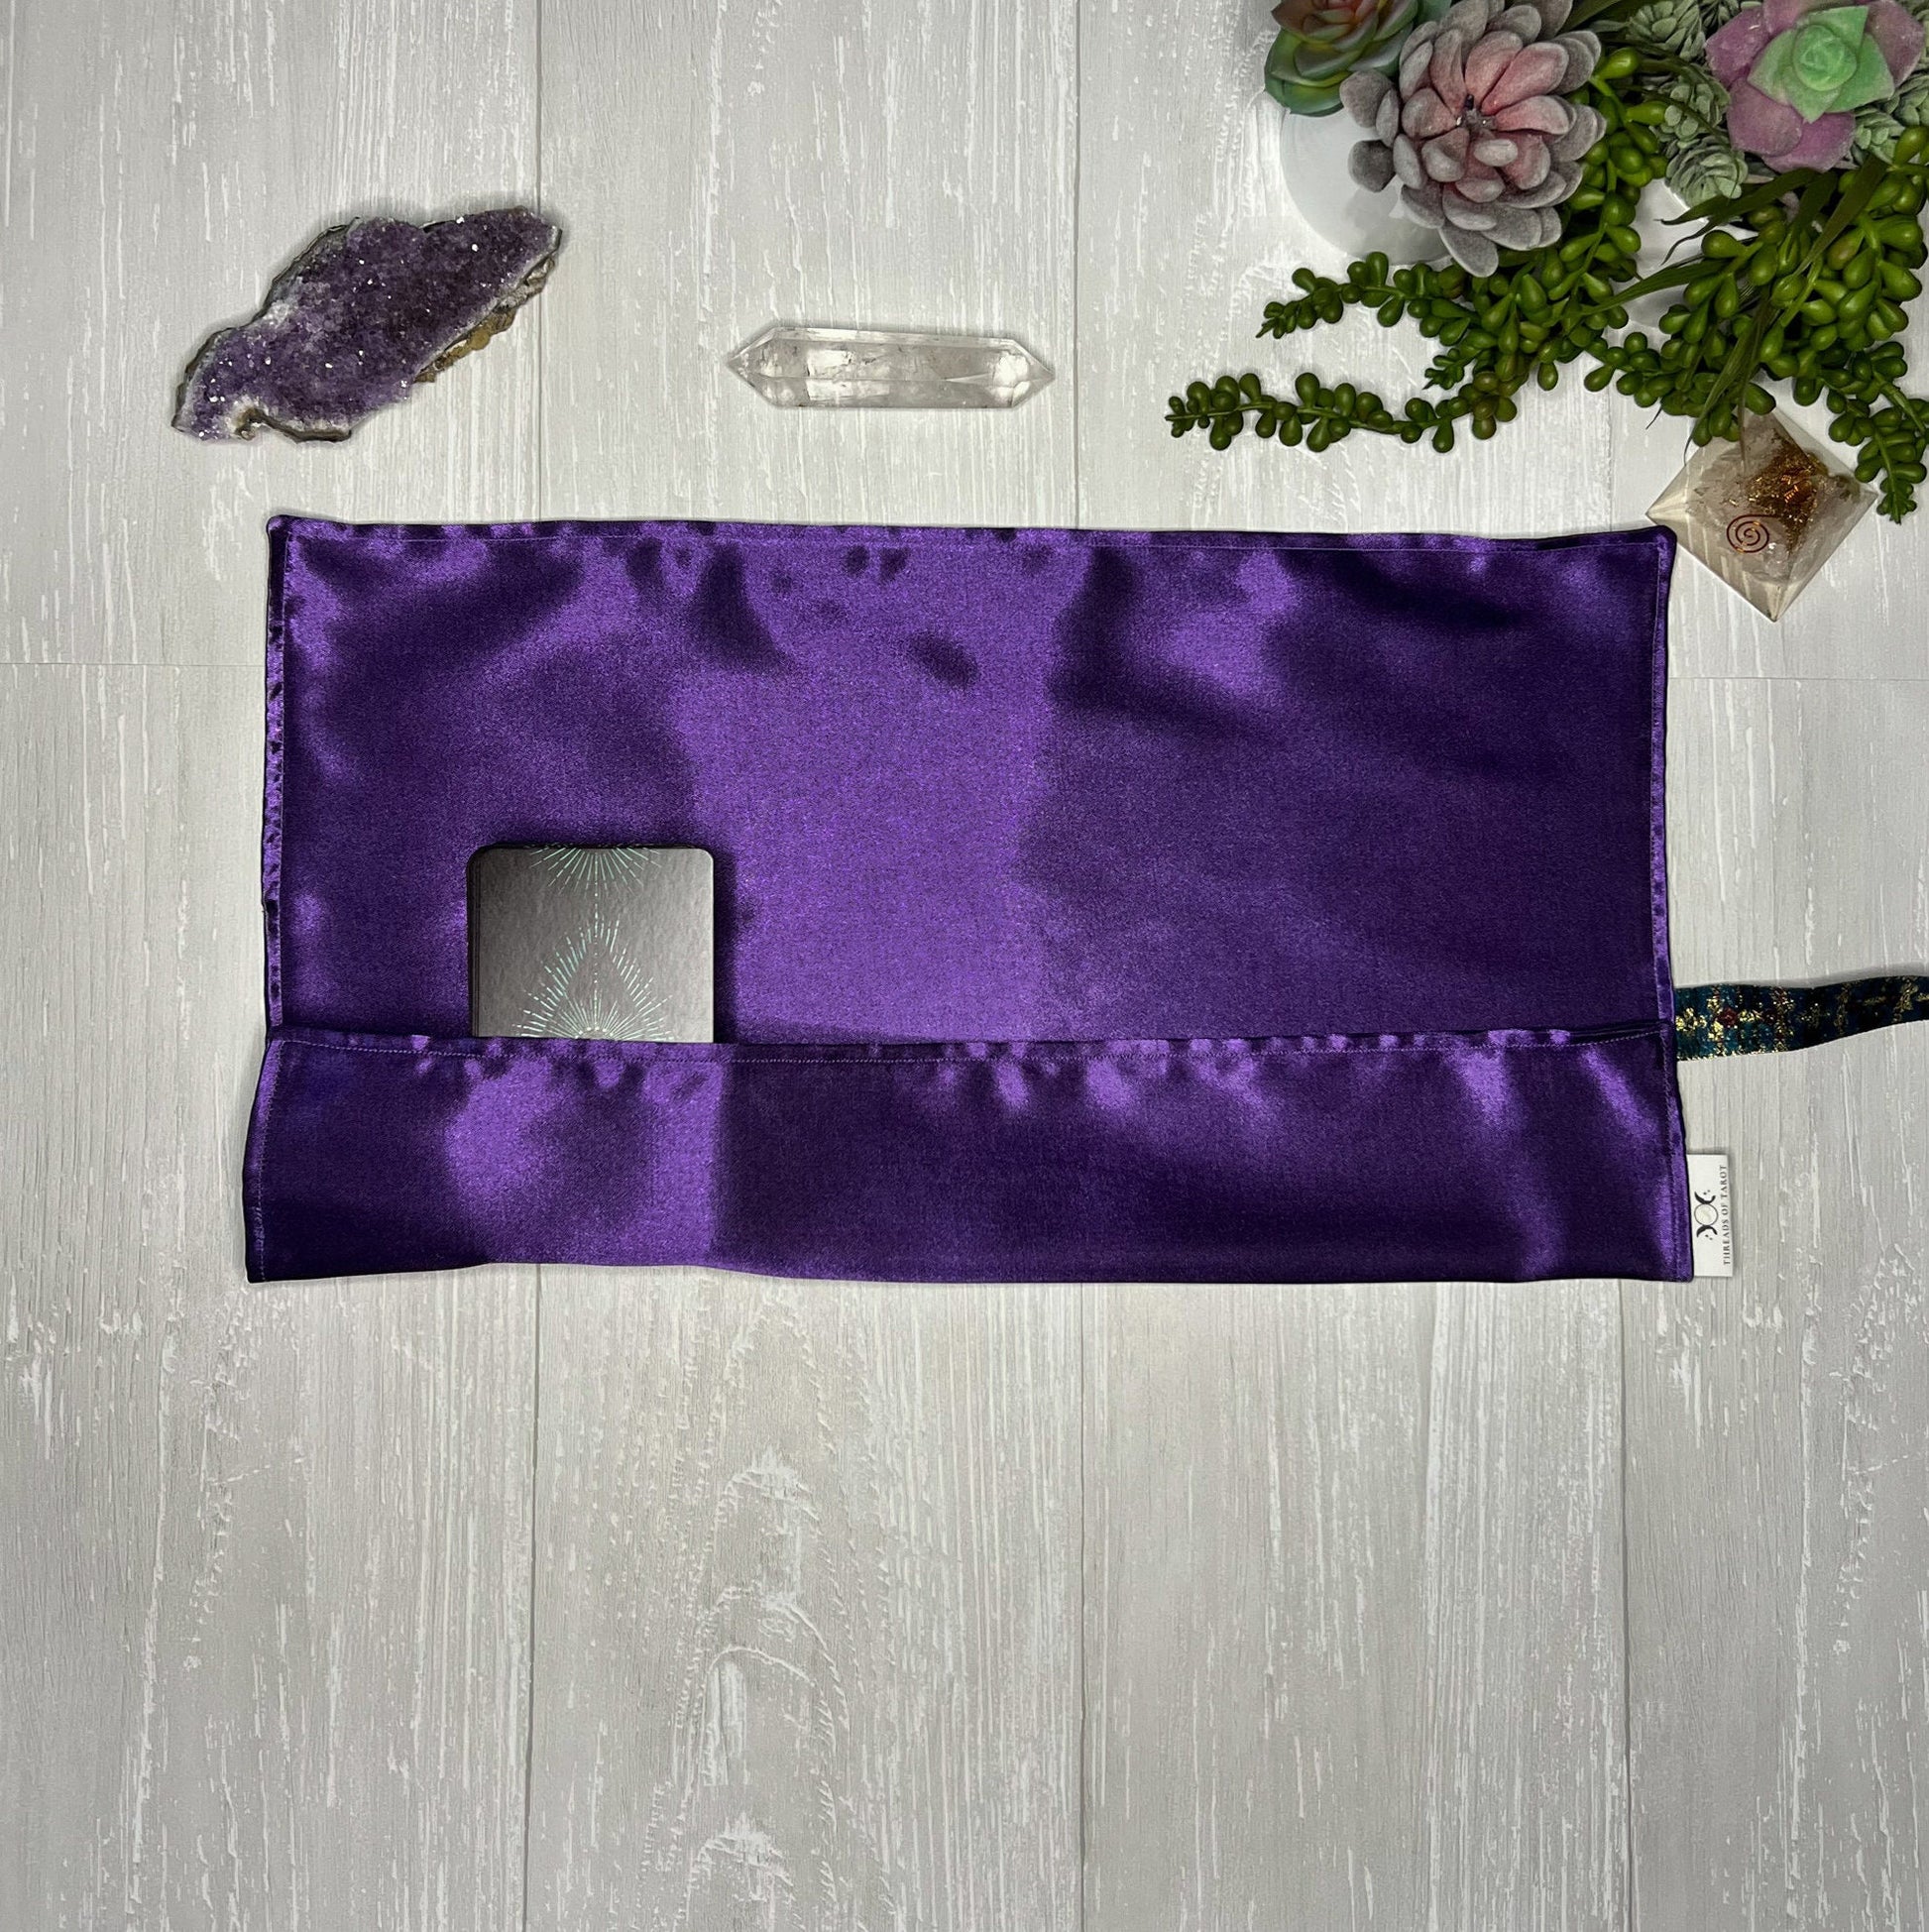 Tarot Wrap, Satin Tarot Storage and Cloth, Tarot Deck Storage Holder, Pagan Witchcraft Wiccan Divination Tools Gifts & Supplies, Purple